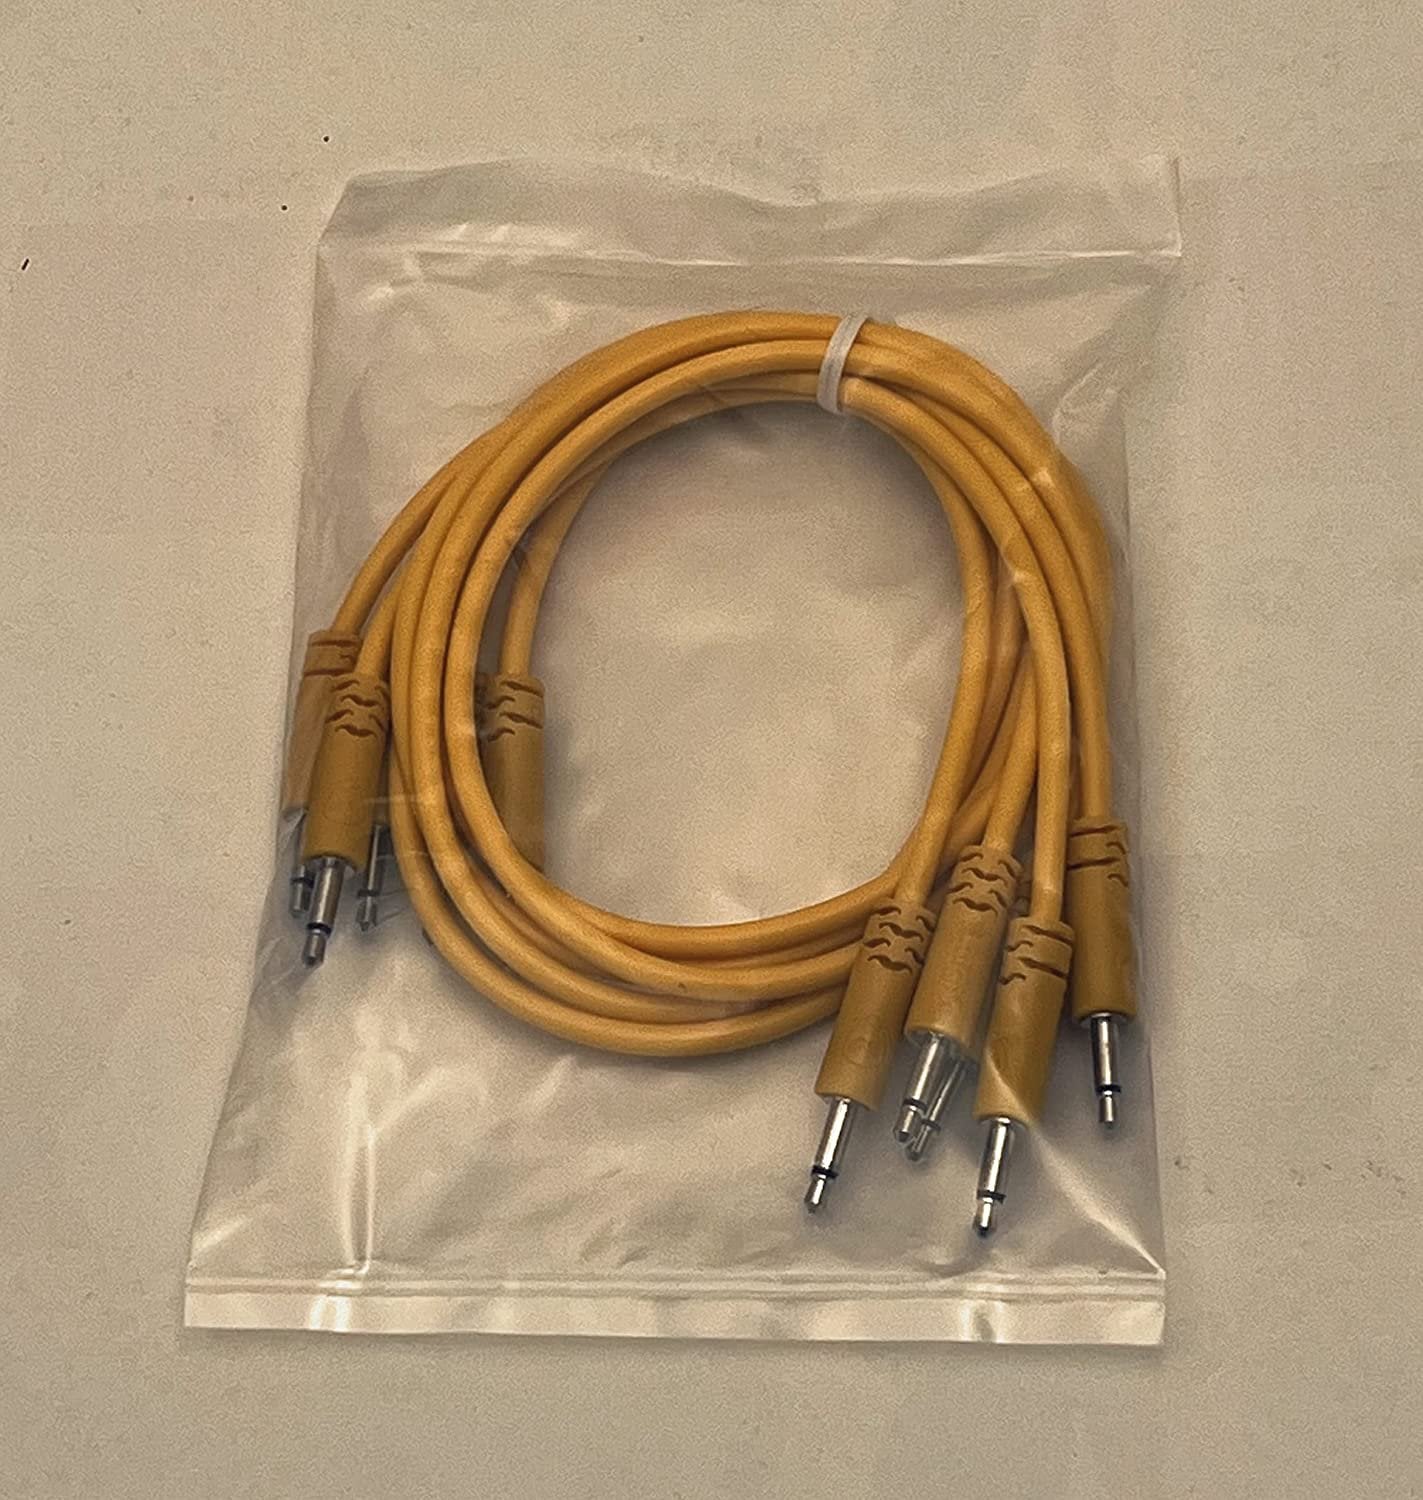 Luigis Modular Supply Spaghetti Eurorack Patch Cables - Package of 5 Gold/Orange Cables, 24 (60 cm)